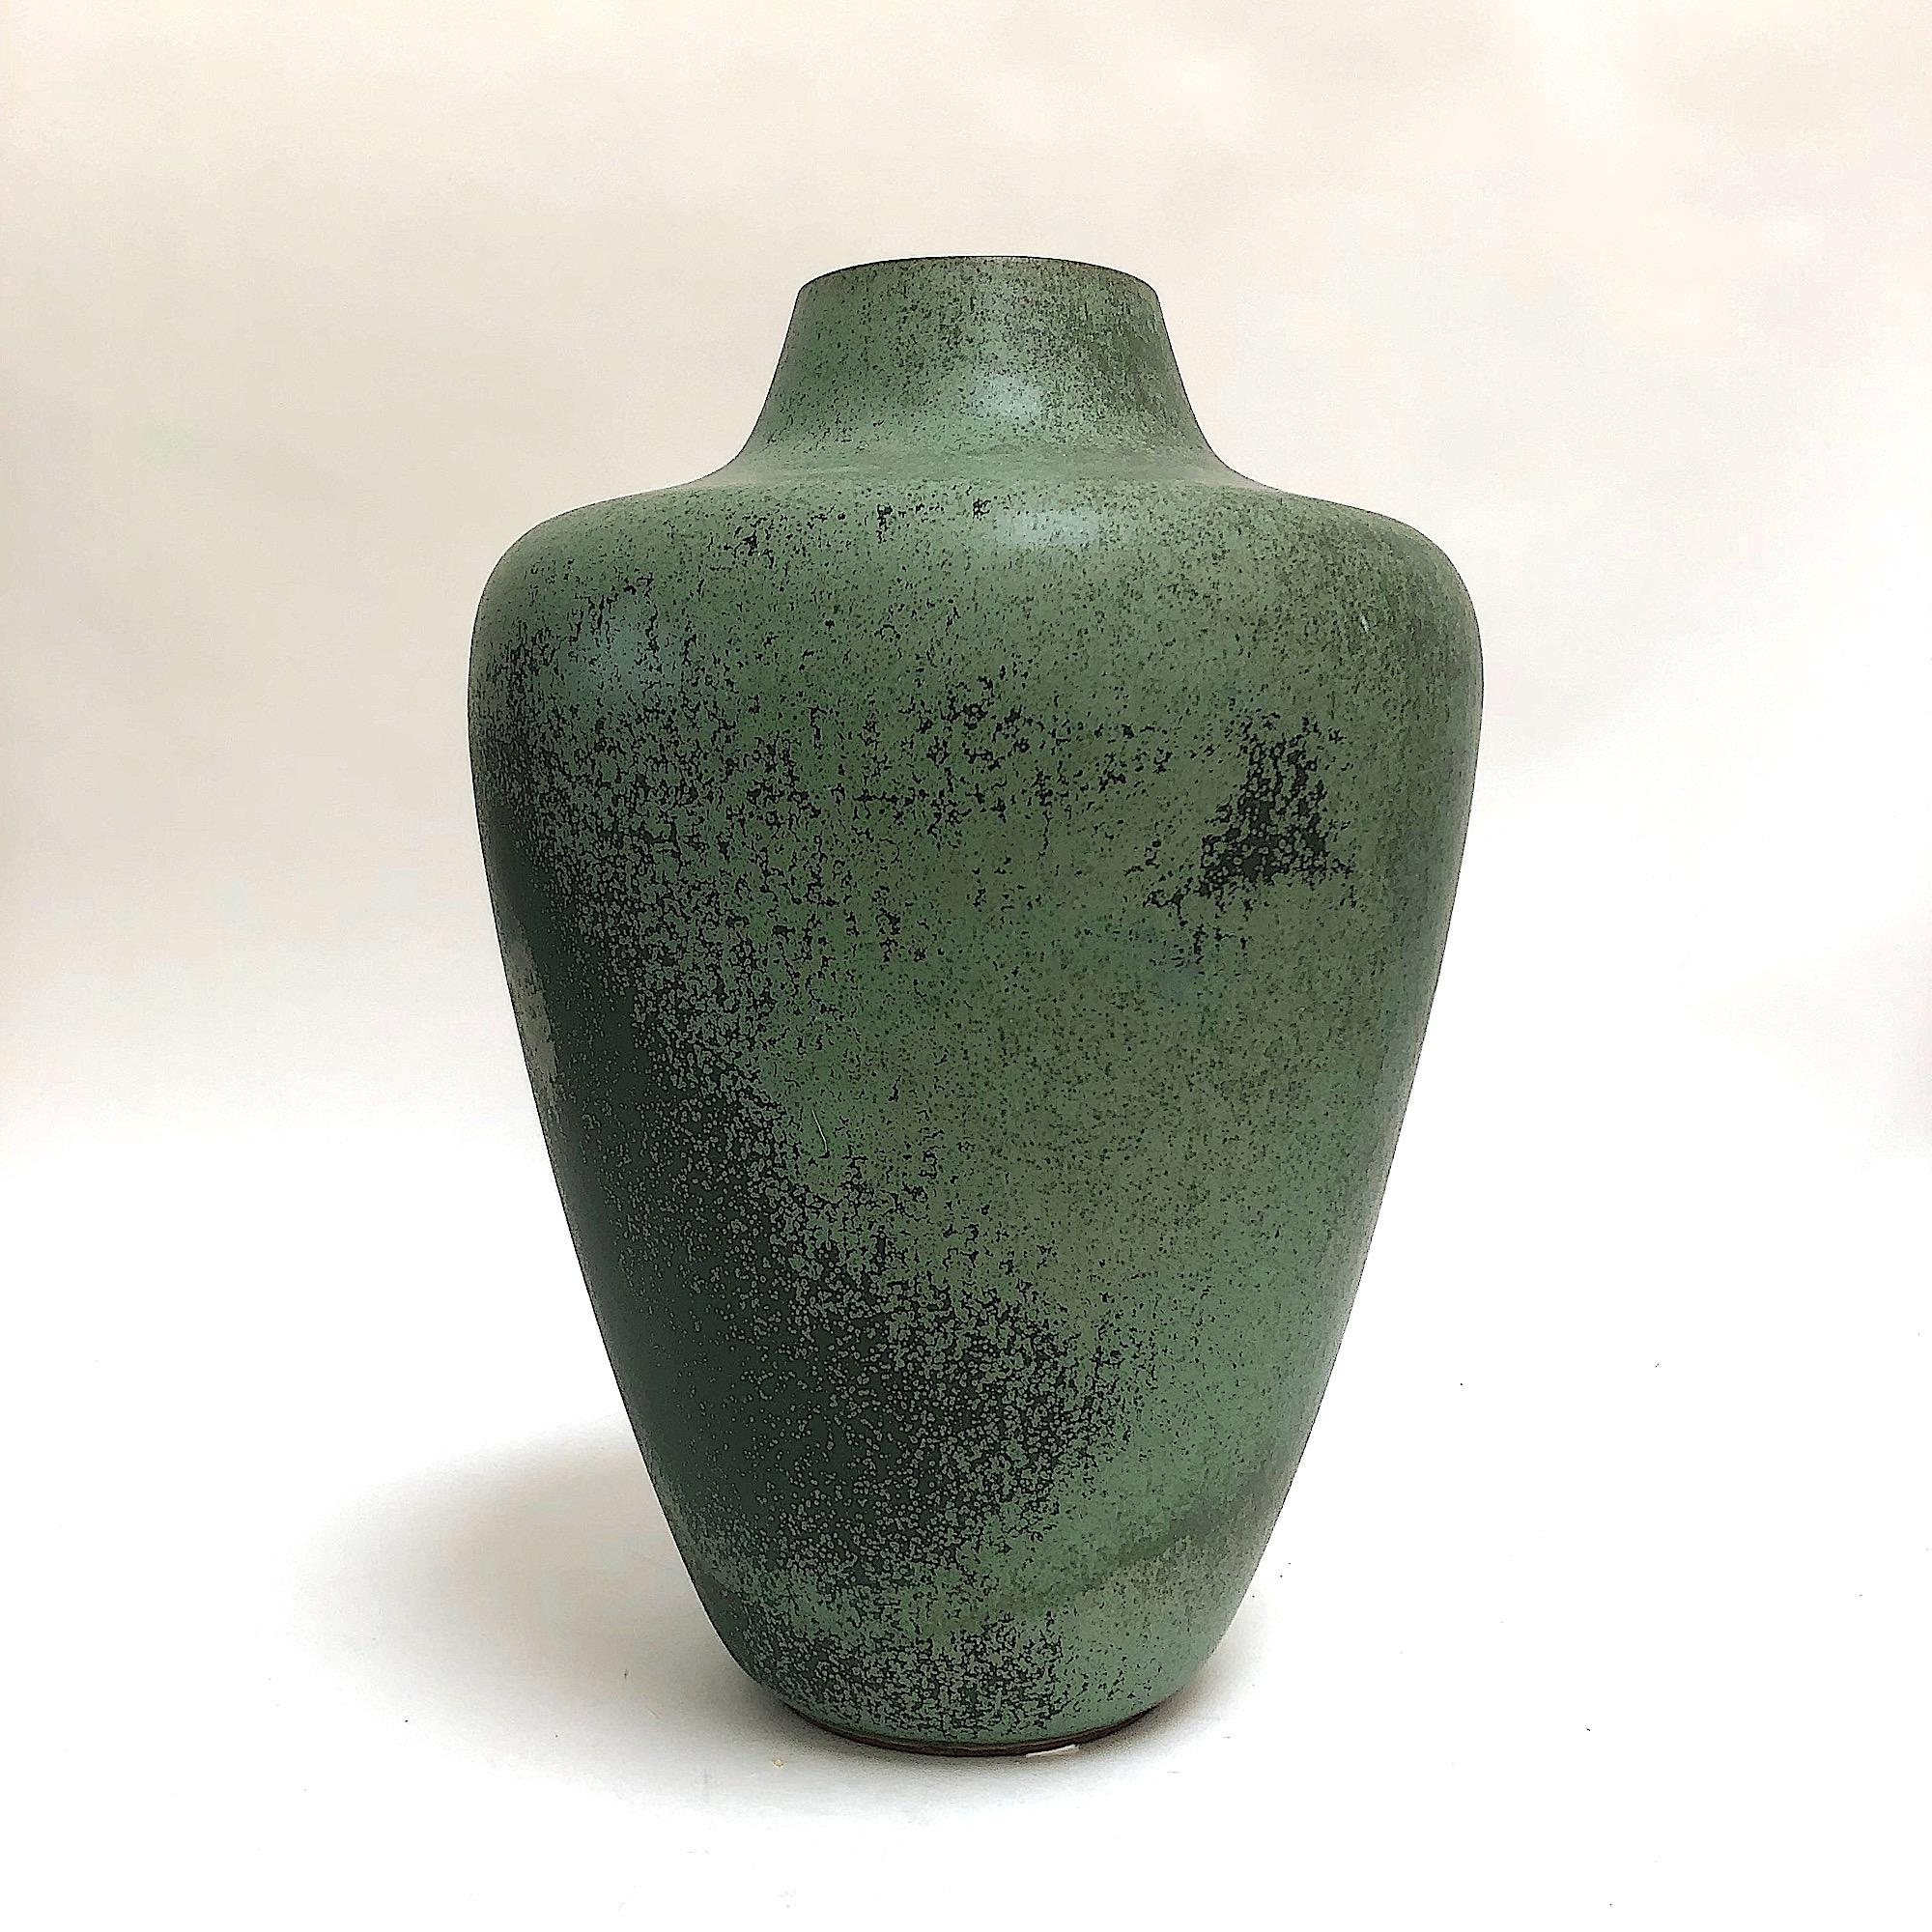 Extra large and rare Classic green Bauhaus ceramic by Hamelner Töpferei, Germany.
Signatur.: stamped 